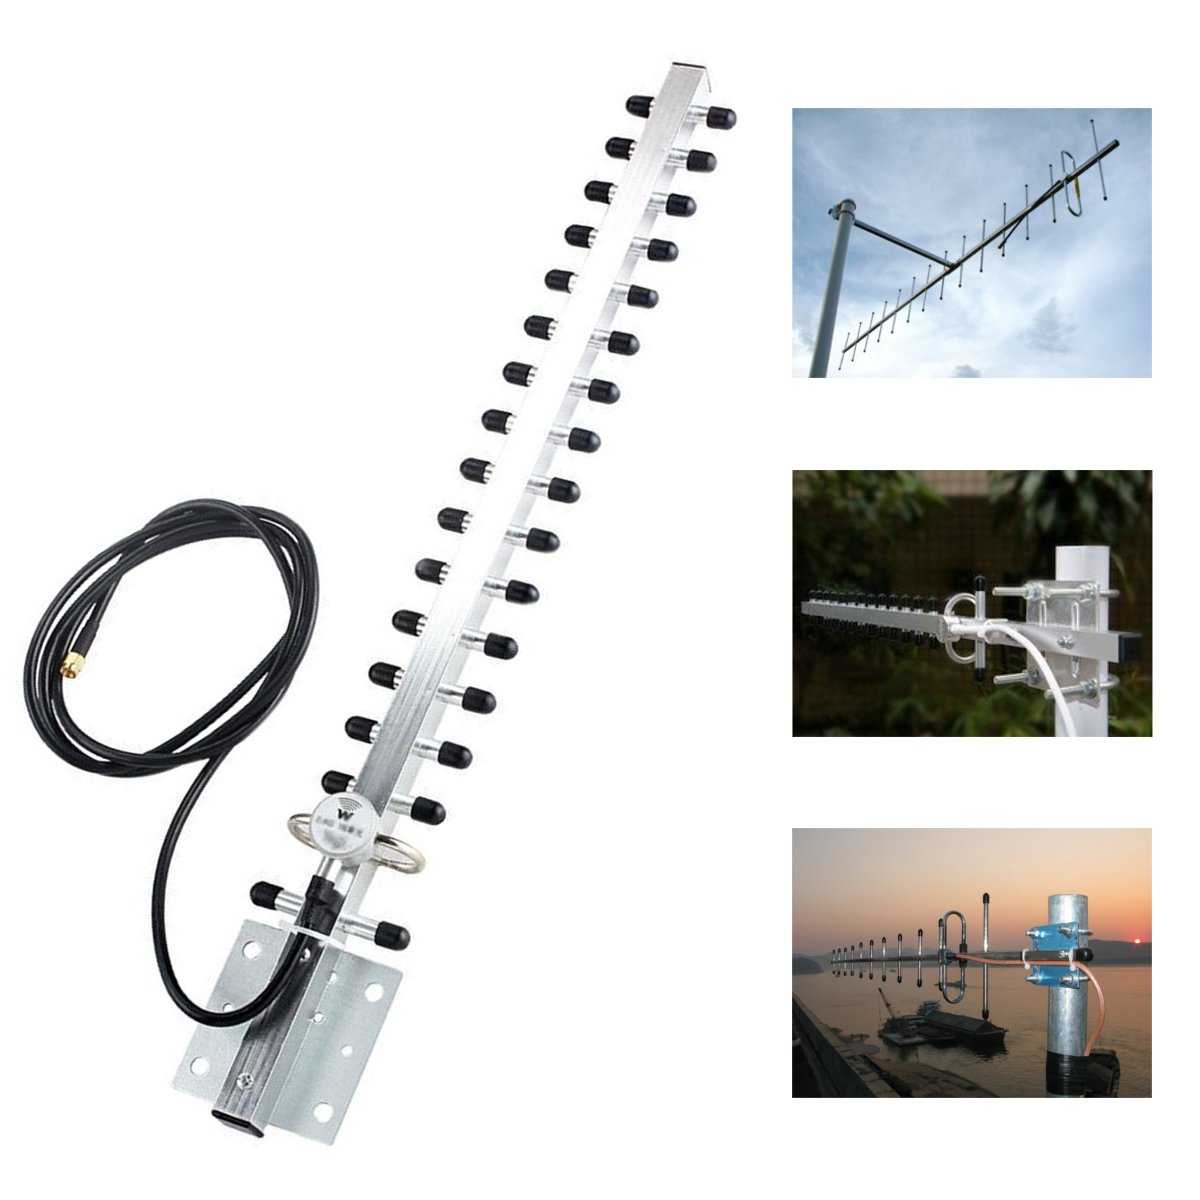 RP-SMA-24GHz-25dBi-Directional-Outdoor-WiFi-Antenna-Wireless-Yagi-Antenna-with-Cable-for-Extending-W-1679563